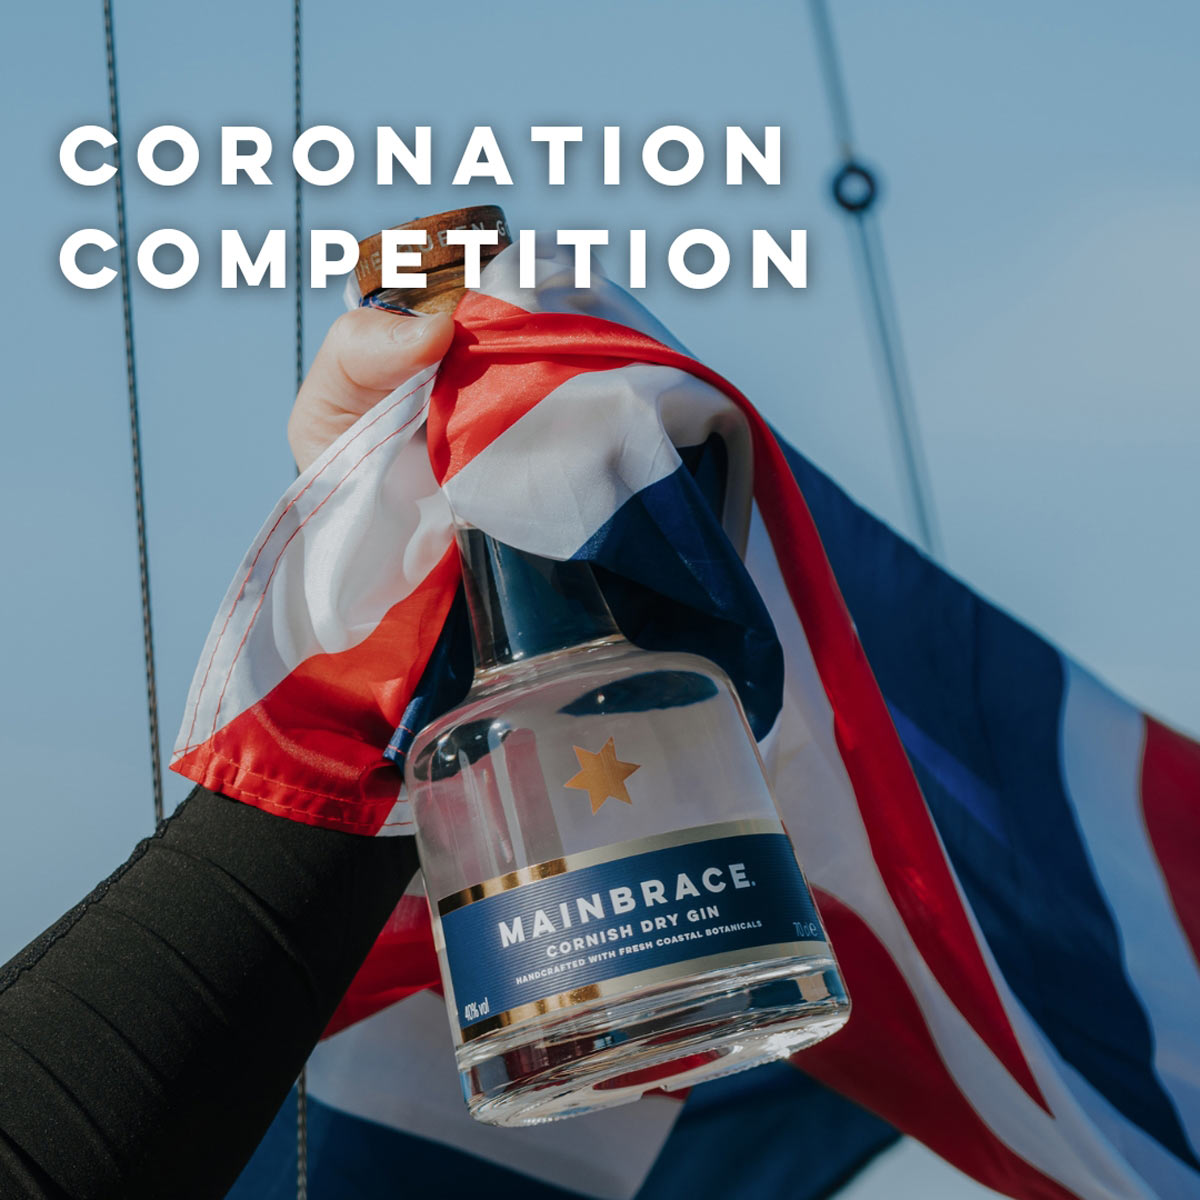 Competition from Mainbrace Rum!